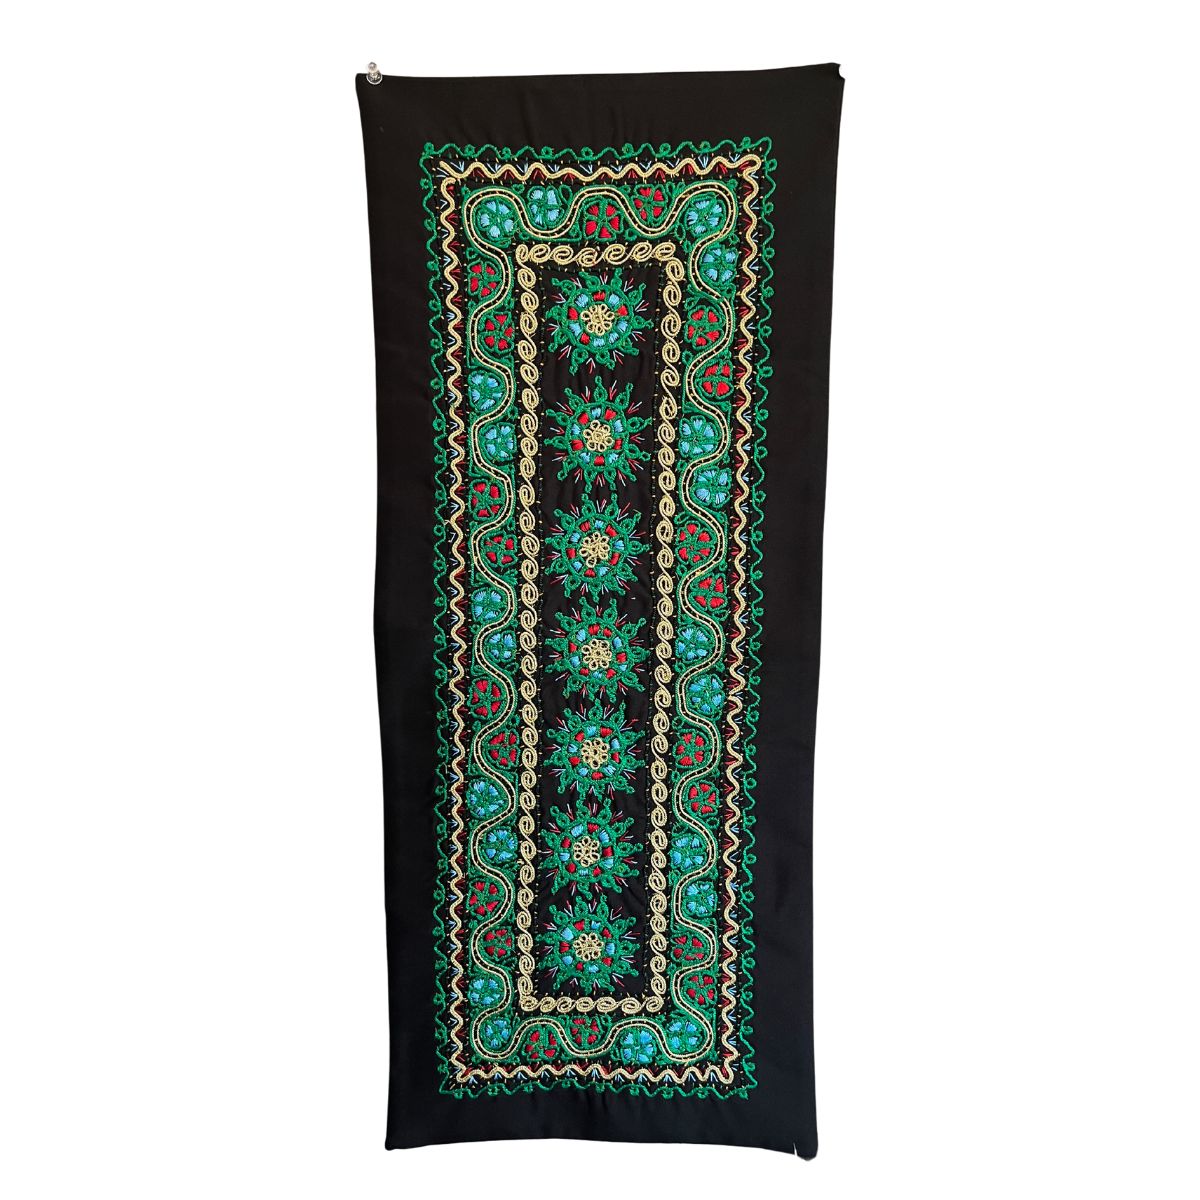 Embroidered Wall Hanging from Gaza